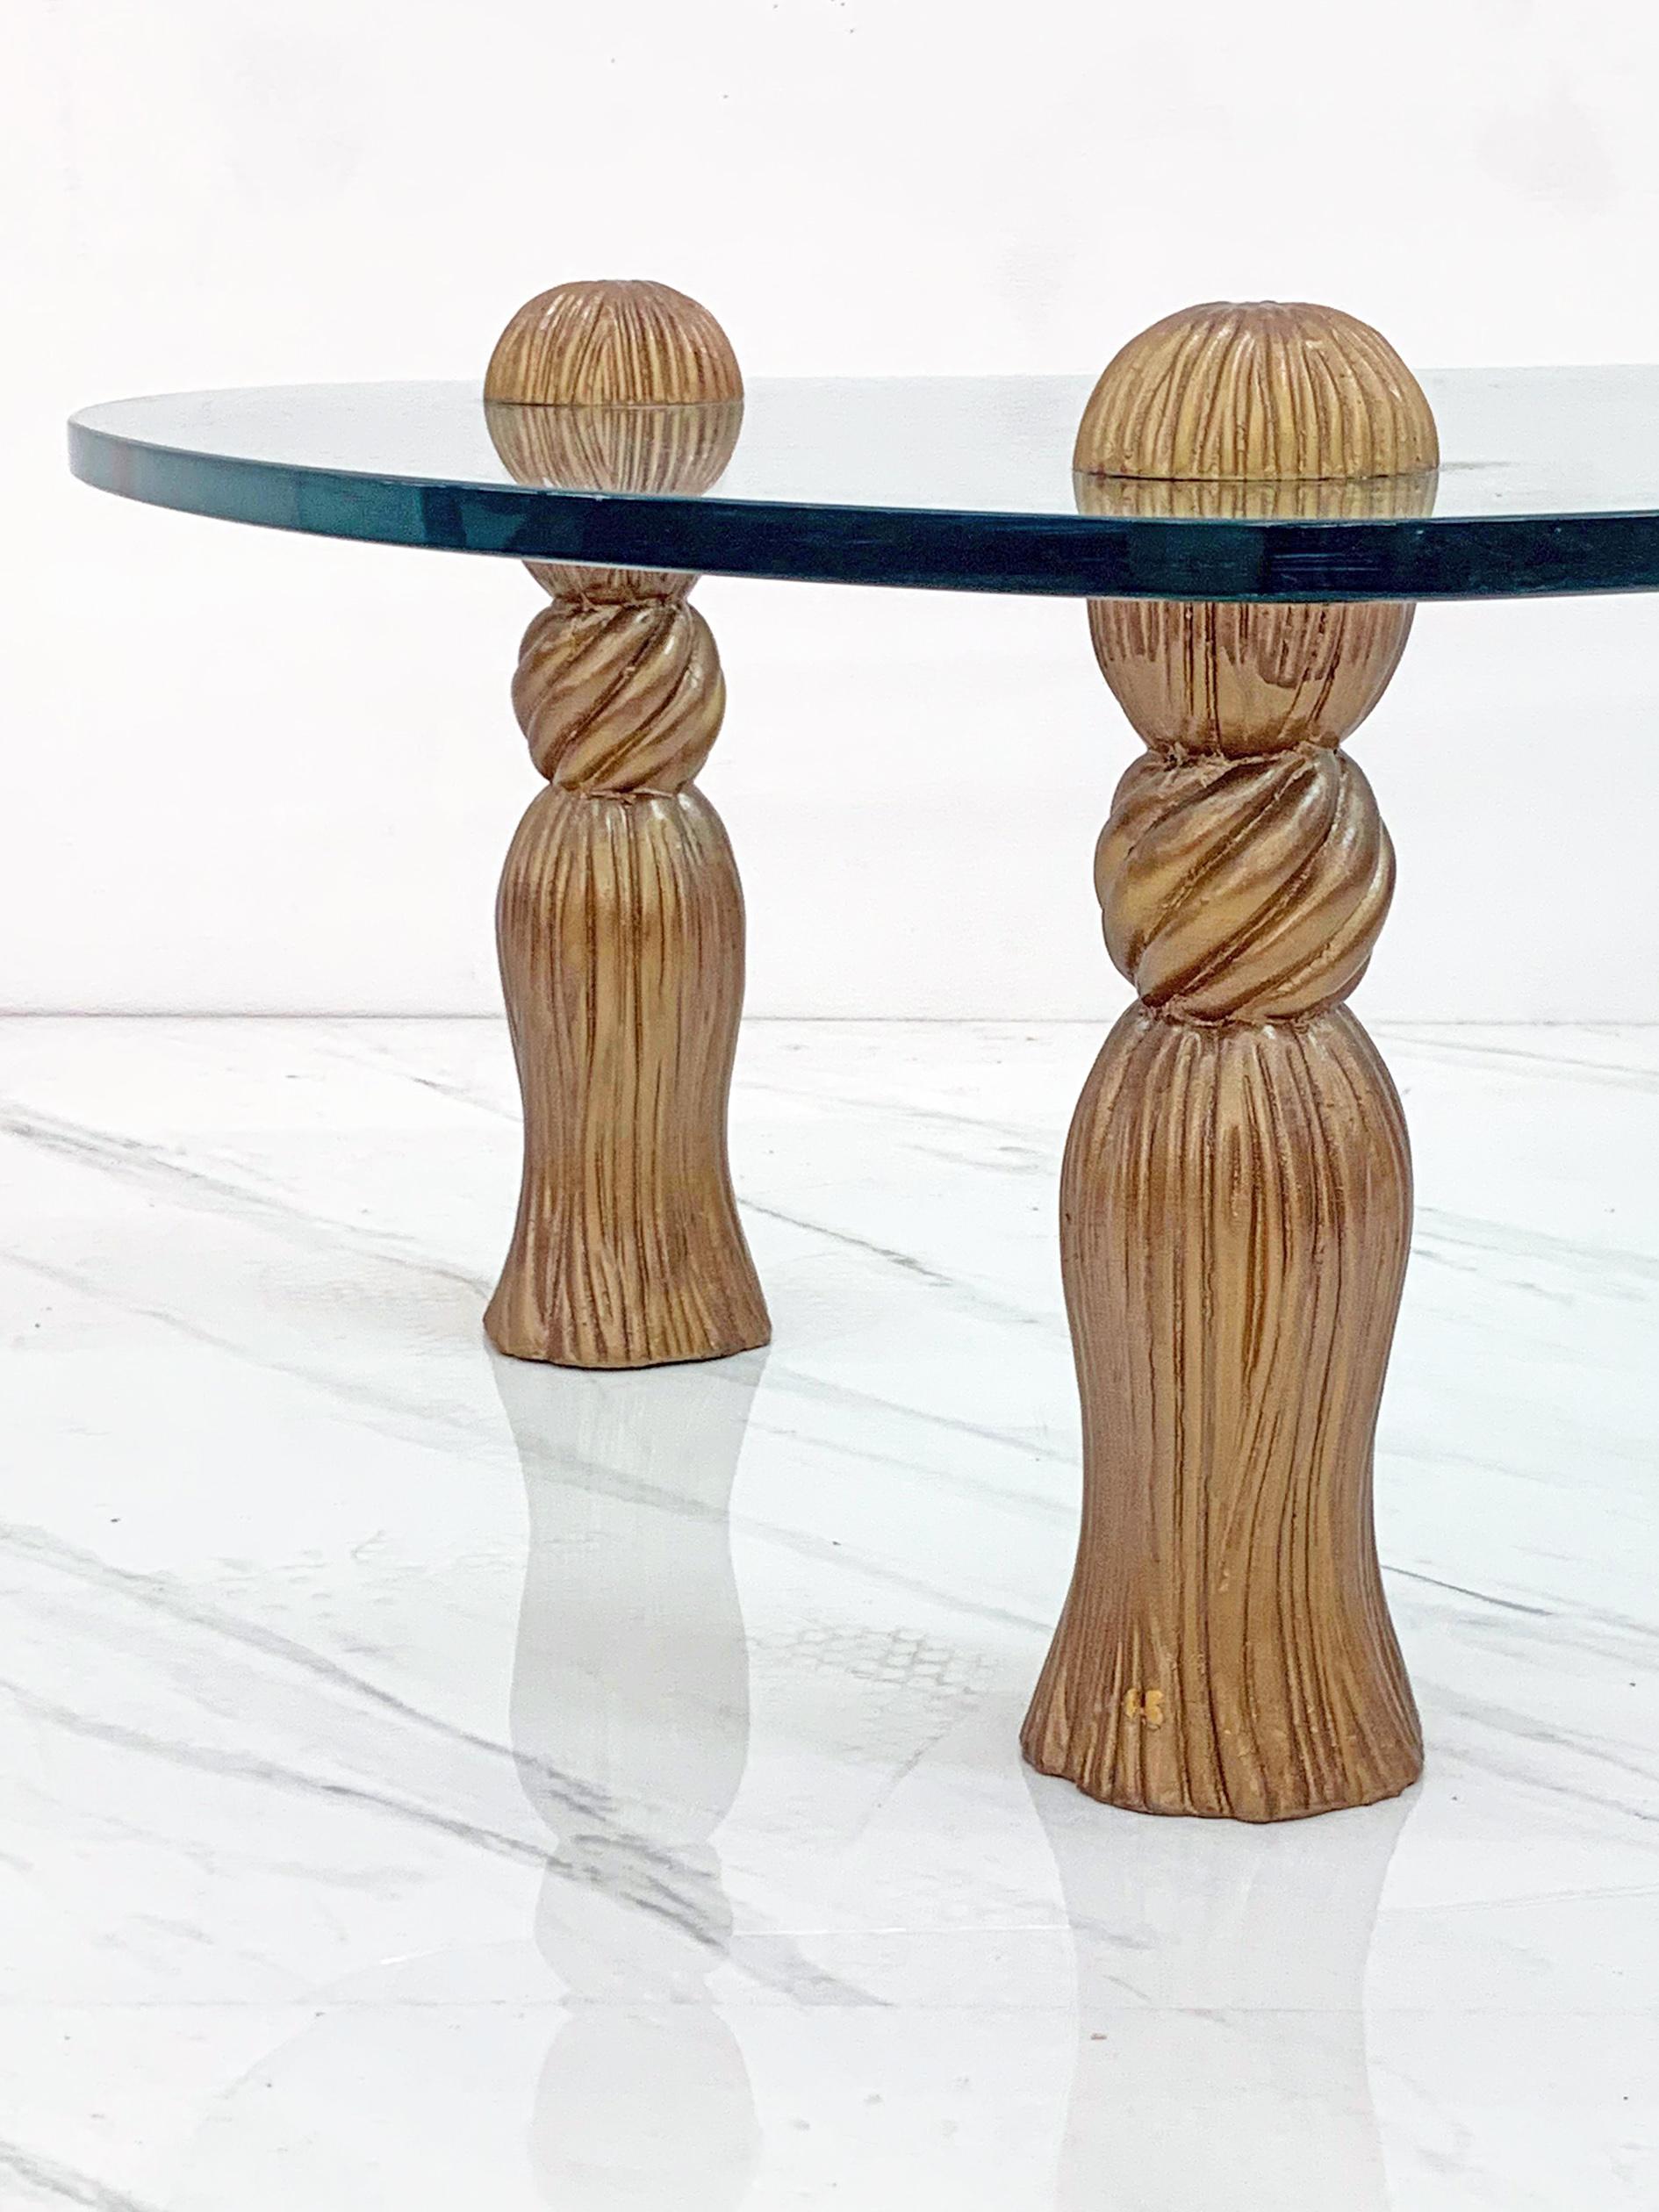 This tassel coffee table designed by Arthur Court in the 1960's is a little bit mid century modern, and a little bit regency, and is everything gorgeous! The table features a great, curved biomorphic design with 3 golden tassels that penetrate the